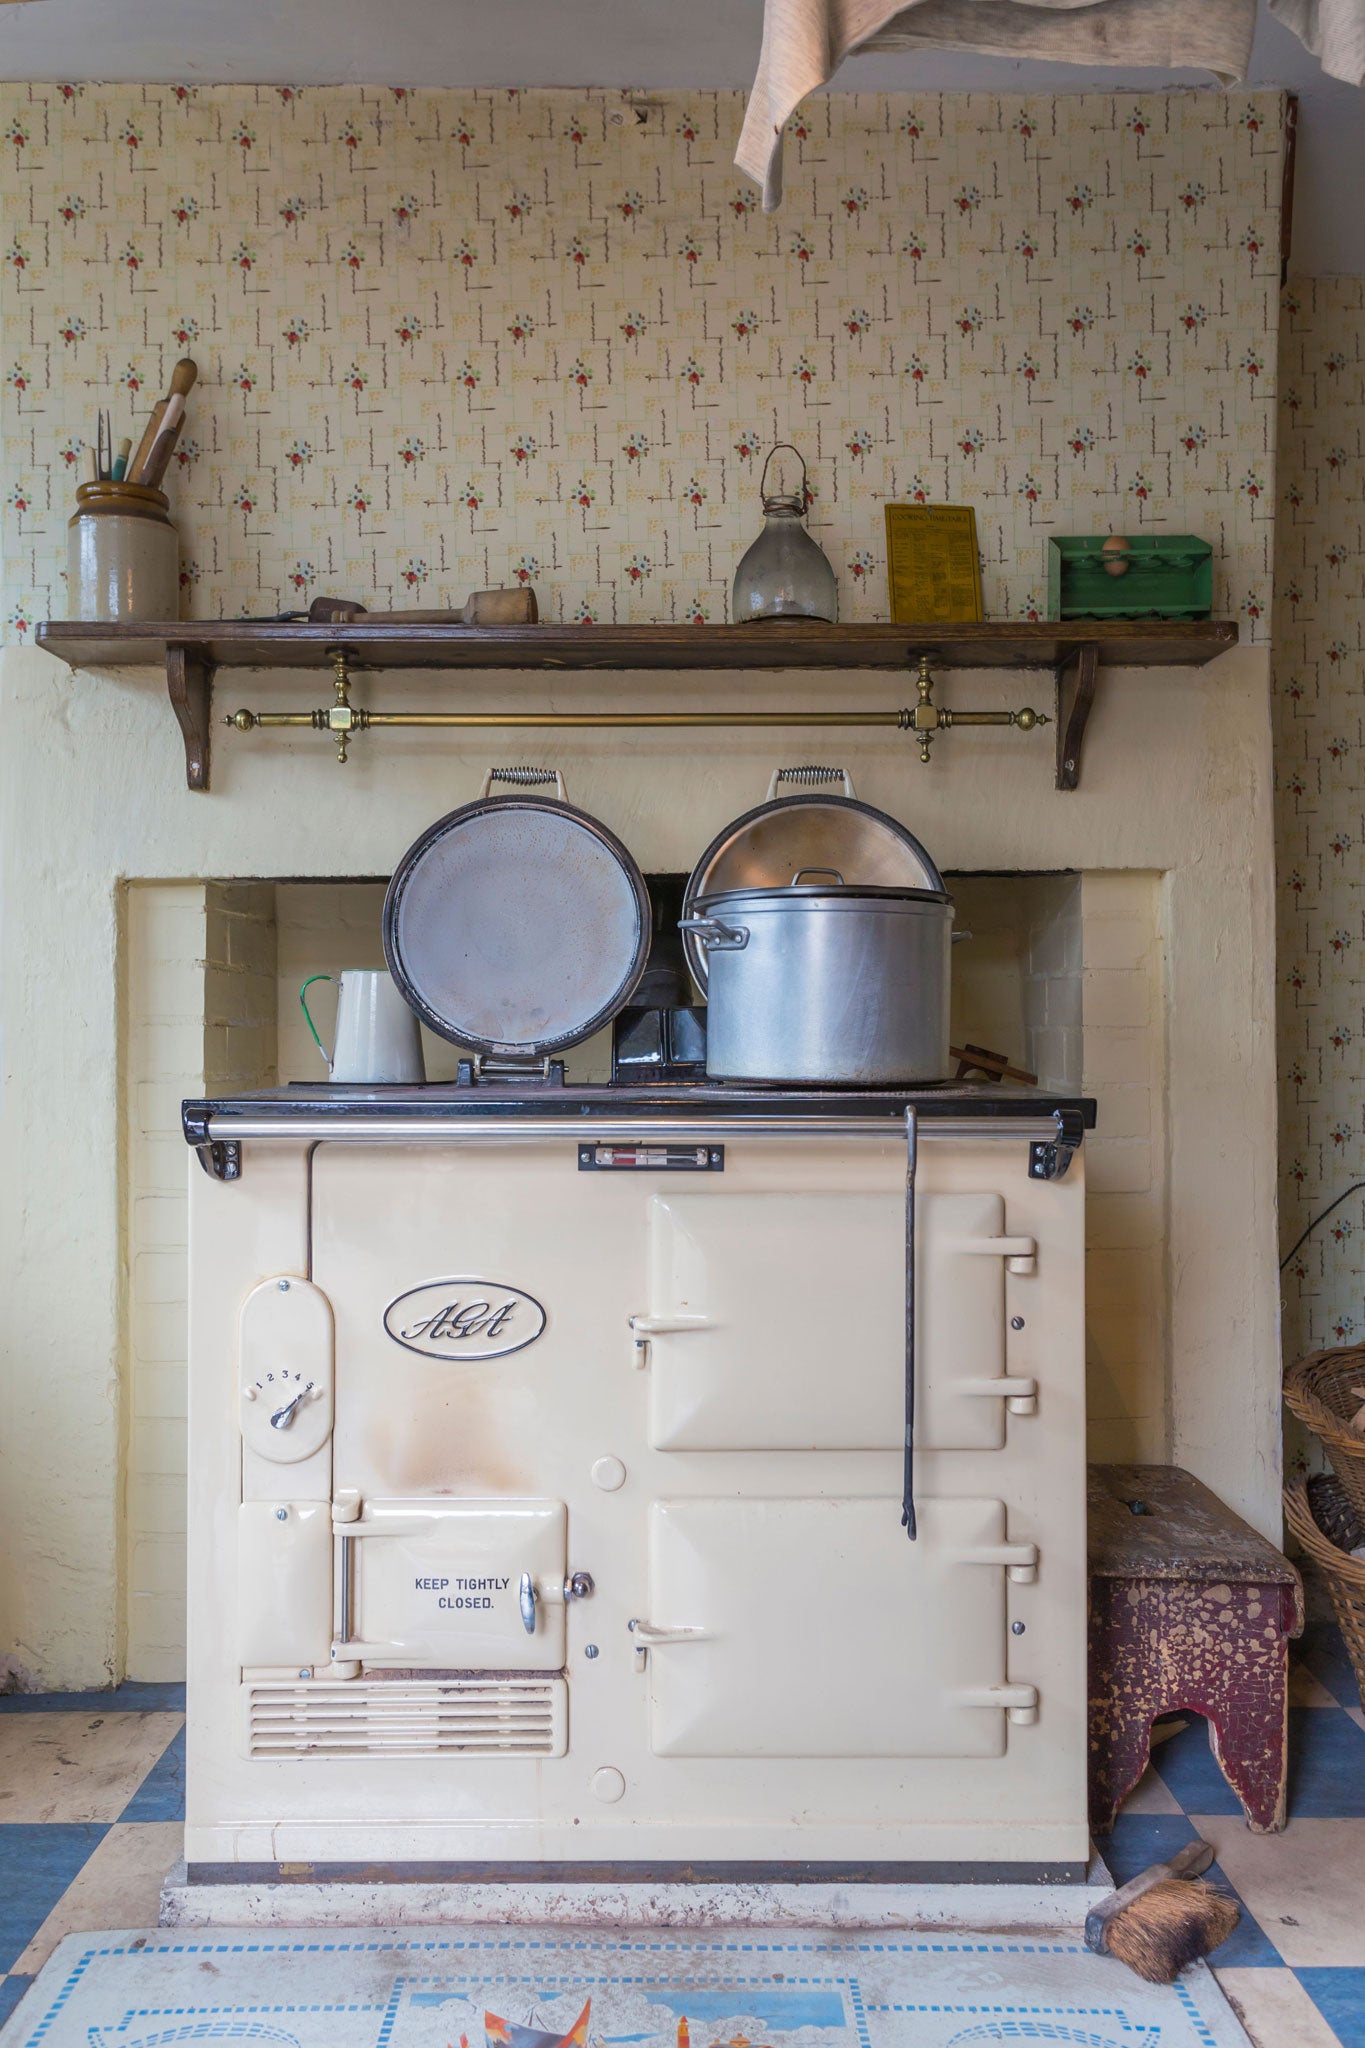 The AGA's history is replete with oddities